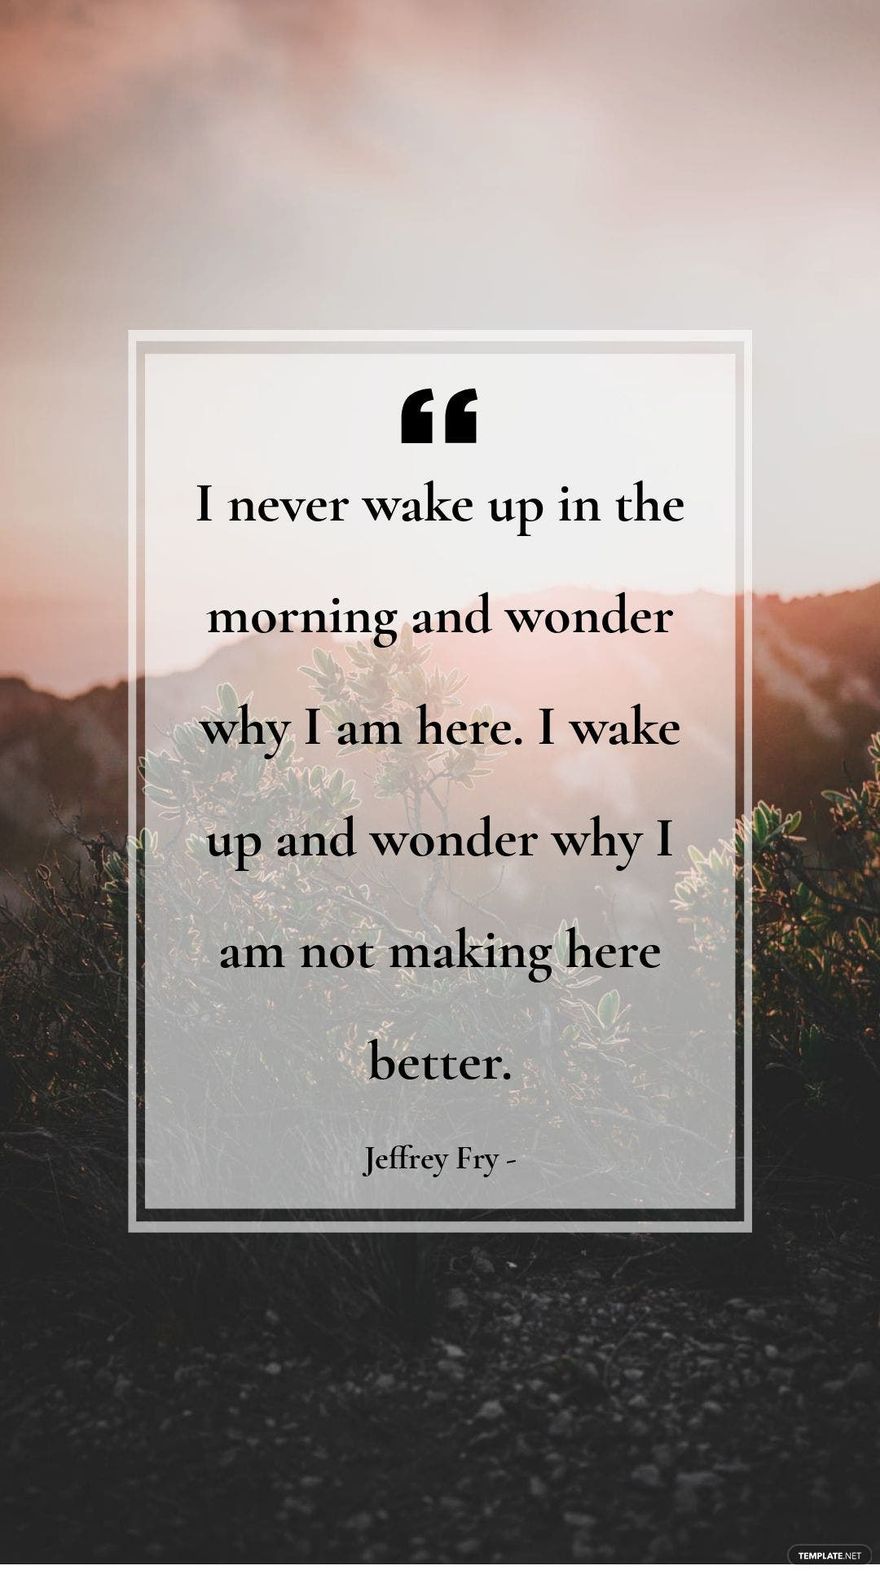 Jeffrey Fry - I never wake up in the morning and wonder why I am here. I wake up and wonder why I am not making here better.